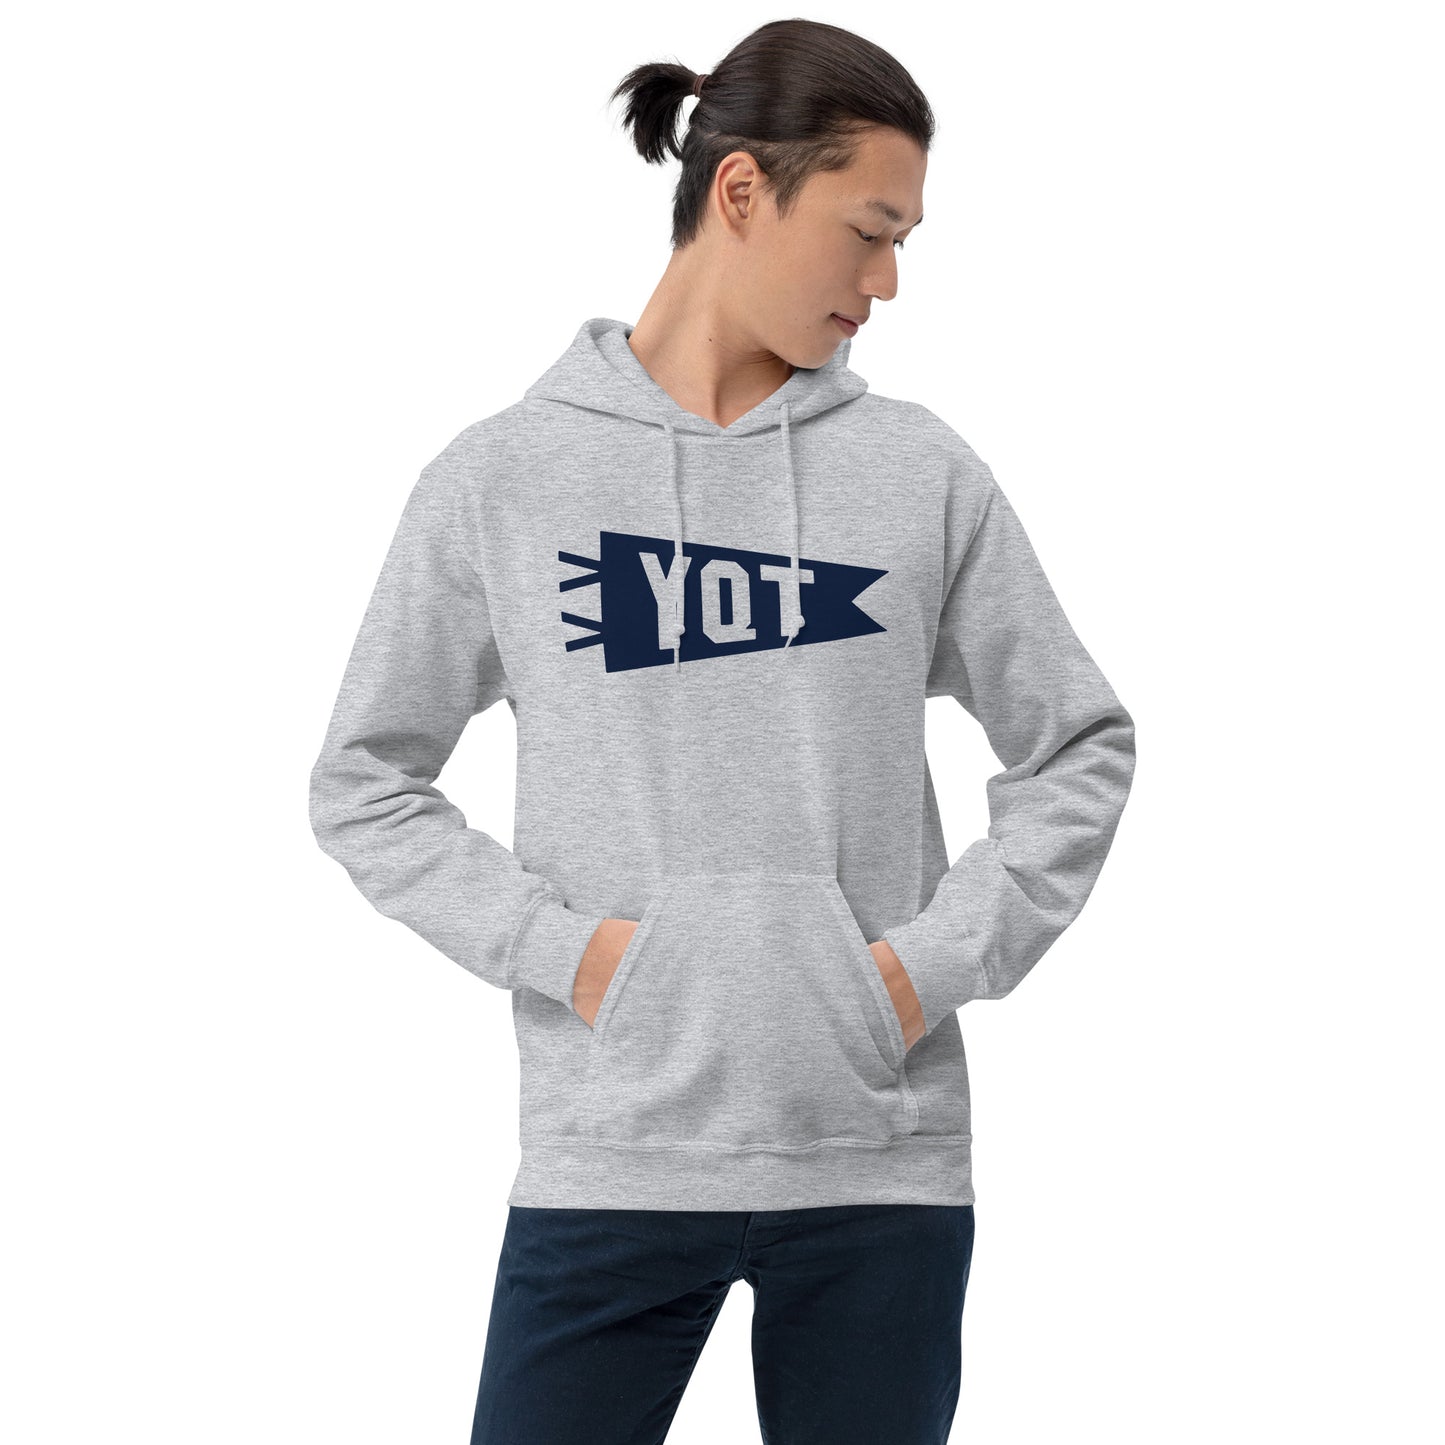 Airport Code Unisex Hoodie - Navy Blue Graphic • YQT Thunder Bay • YHM Designs - Image 07